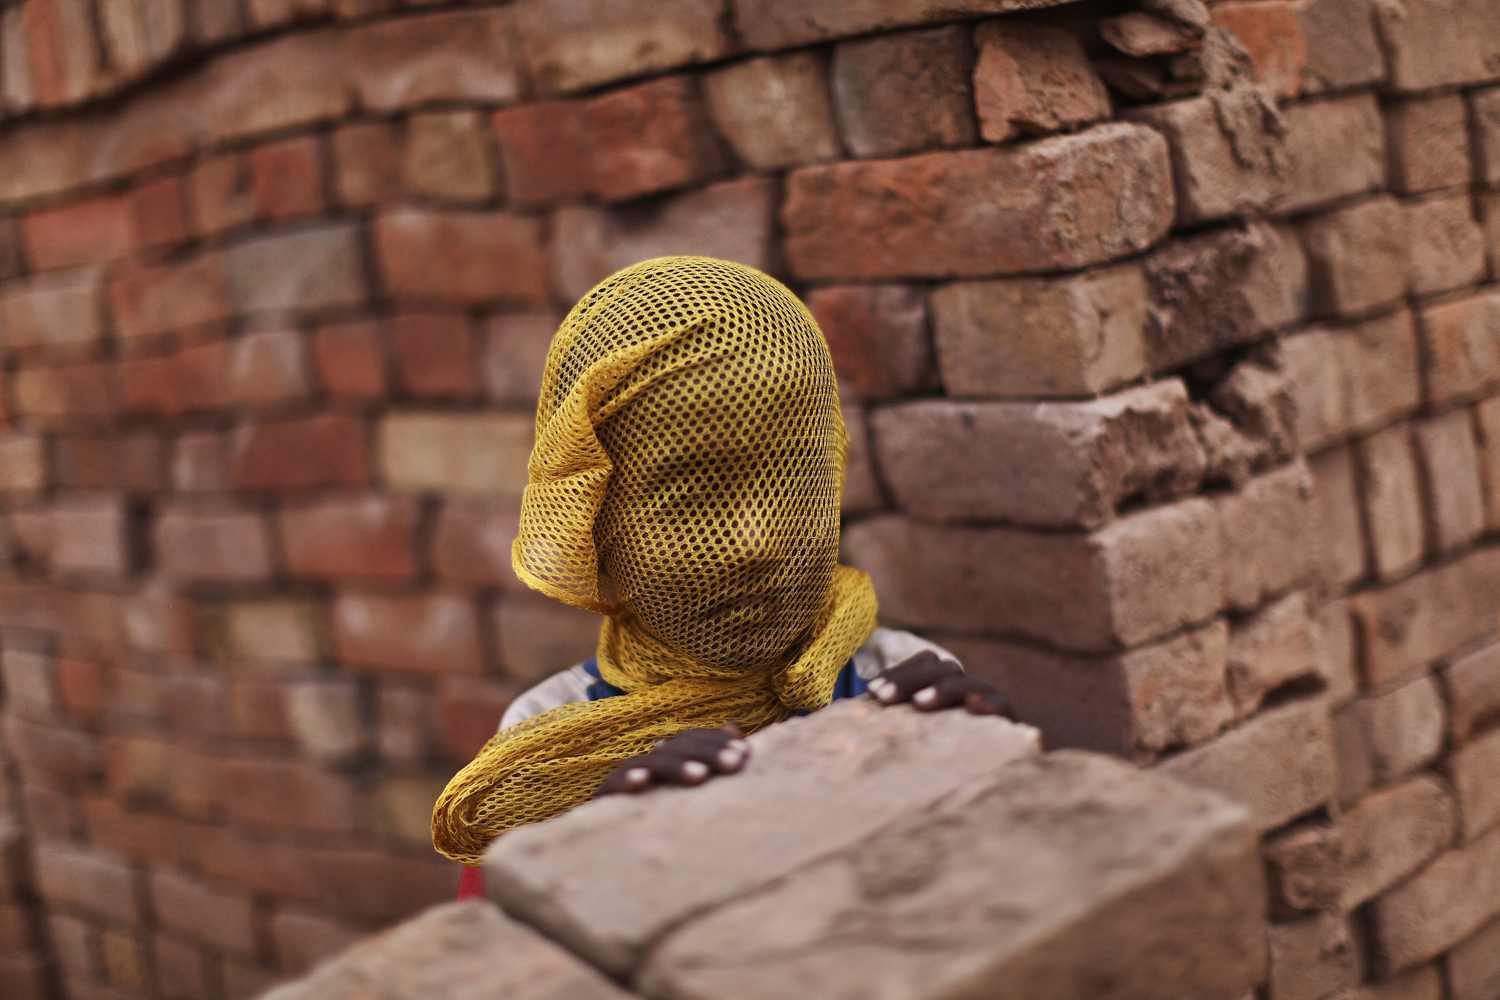 June 6, 2012. A Pakistani boy who lives near by a brick factory covers his face with a scarf to avoid a sand storm, on the outskirts of Islamabad.